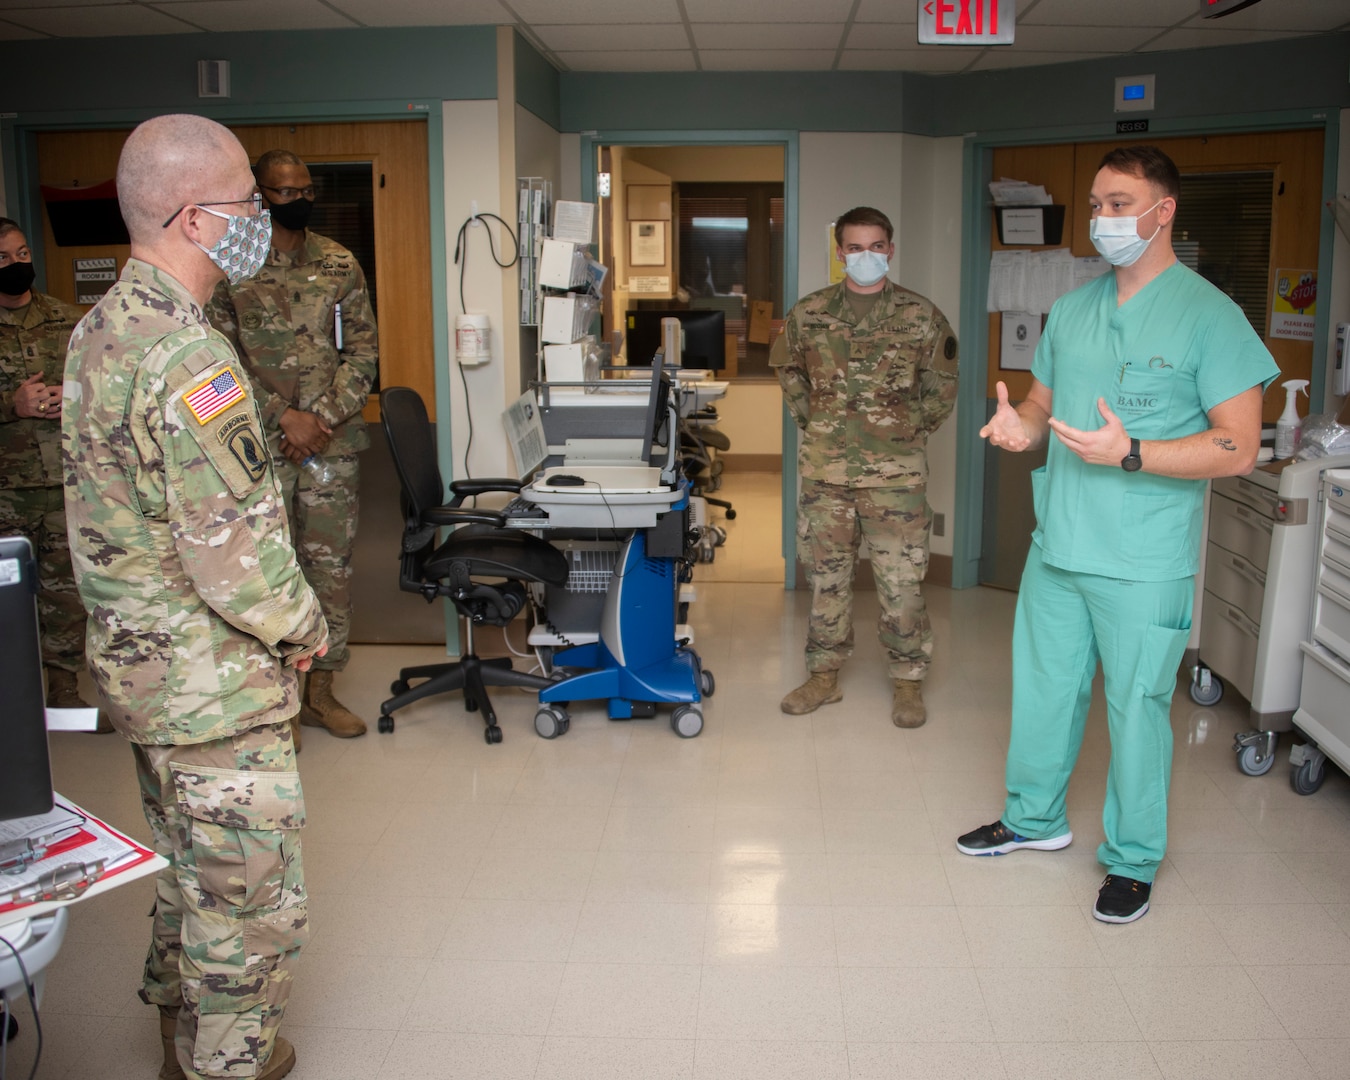 Army Lt. Gen. Ronald Place, Director, Defense Health Agency, talks with Spc. Aaron Neuenschwander, health care specialist, at Brooke Army Medical Center, Fort Sam Houston, Texas, Jan. 20, 2021.